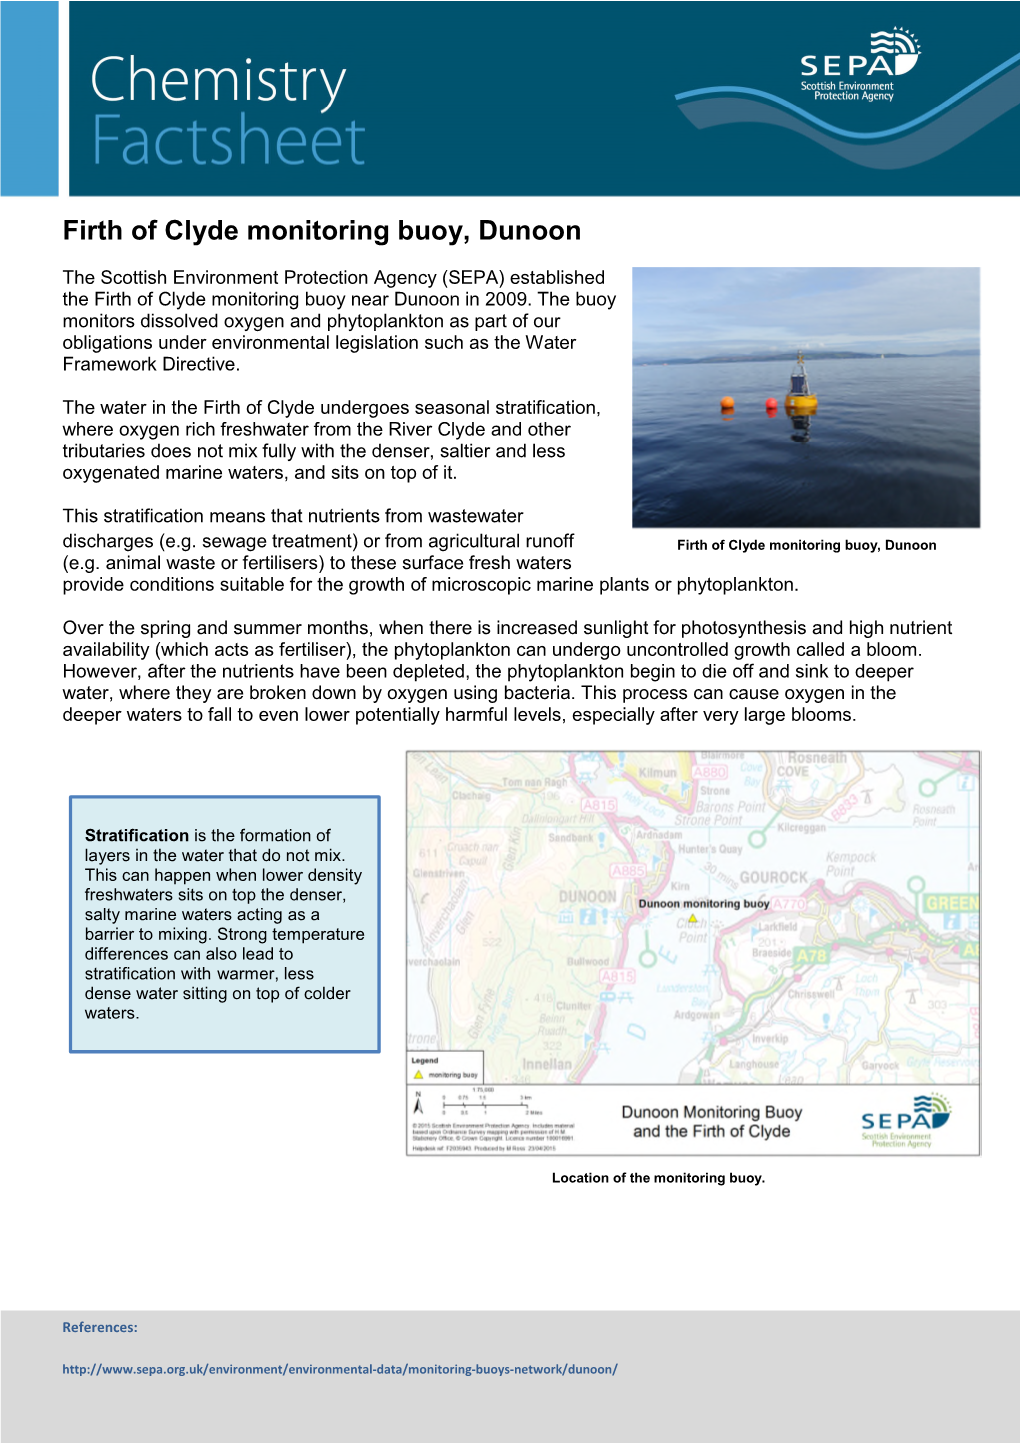 Firth of Clyde Monitoring Buoy Factsheet